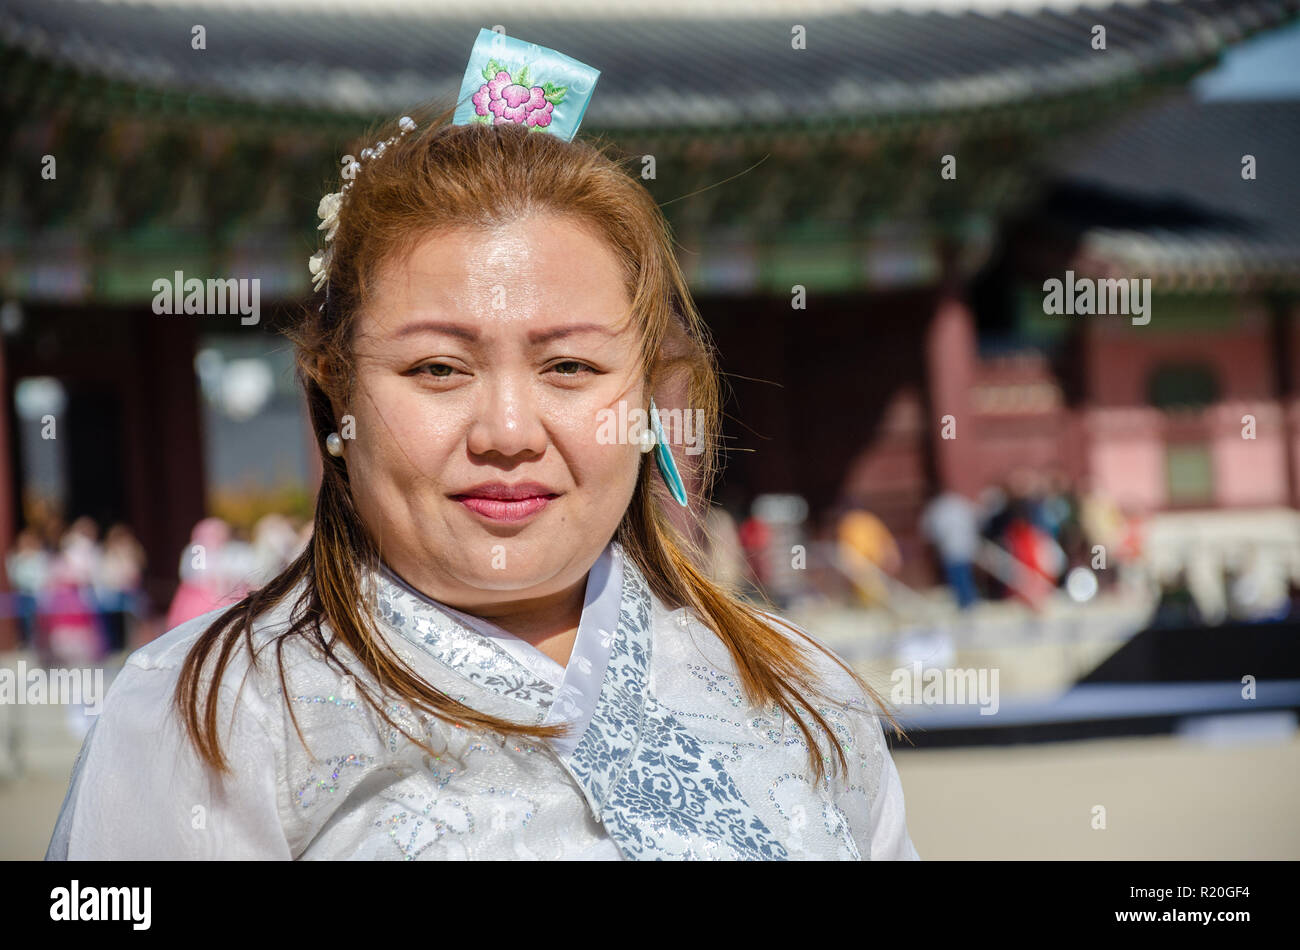 Lady tourist dressed up in traditional Korean dress, a hanbok, stood posing and smiling. Stock Photo